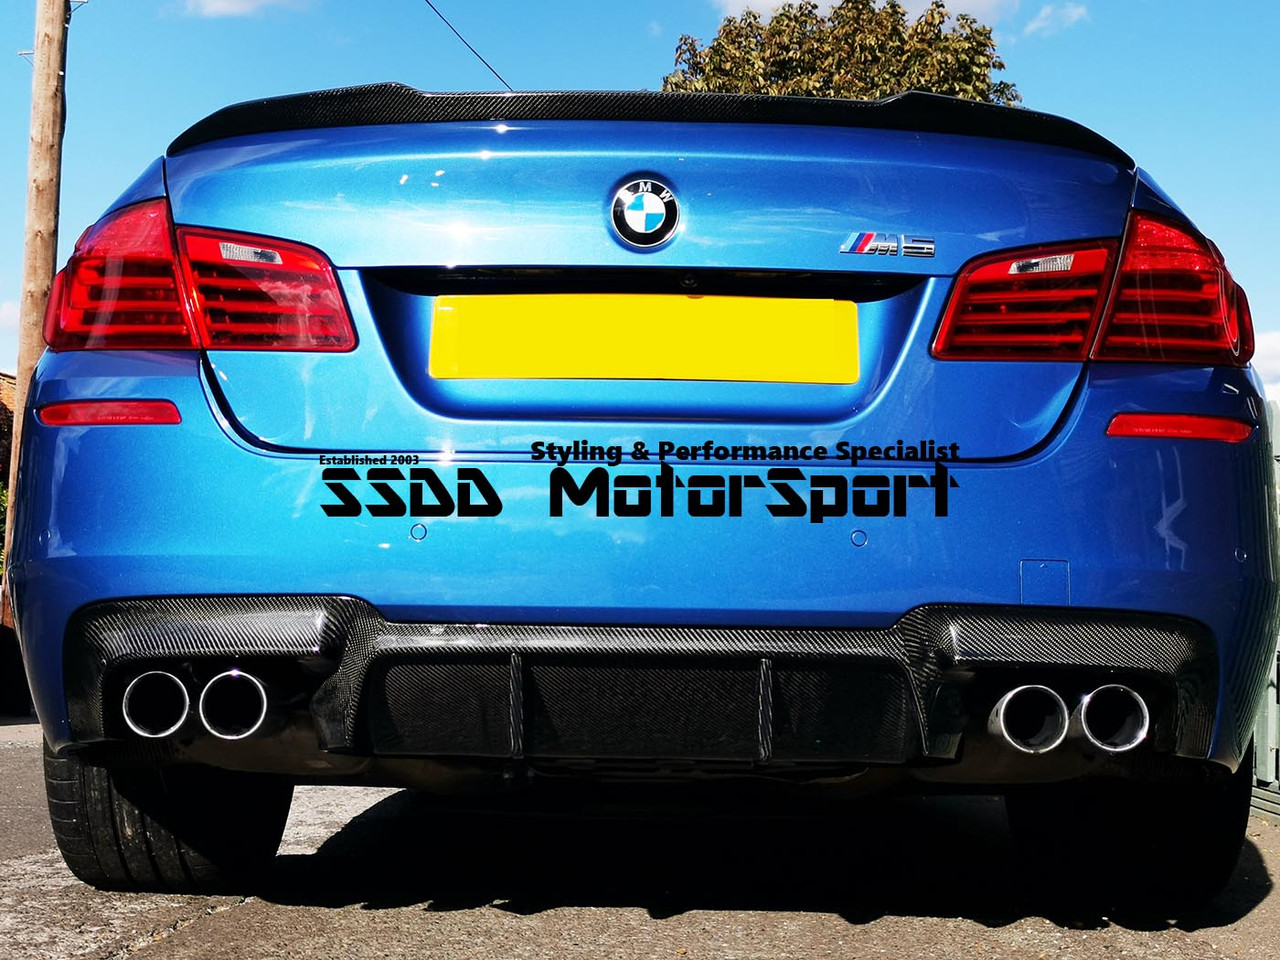 CS Competition Style Dry Carbon Boot Spoiler for BMW F10, F10 M5 Saloon -  SSDD MotorSport Ltd